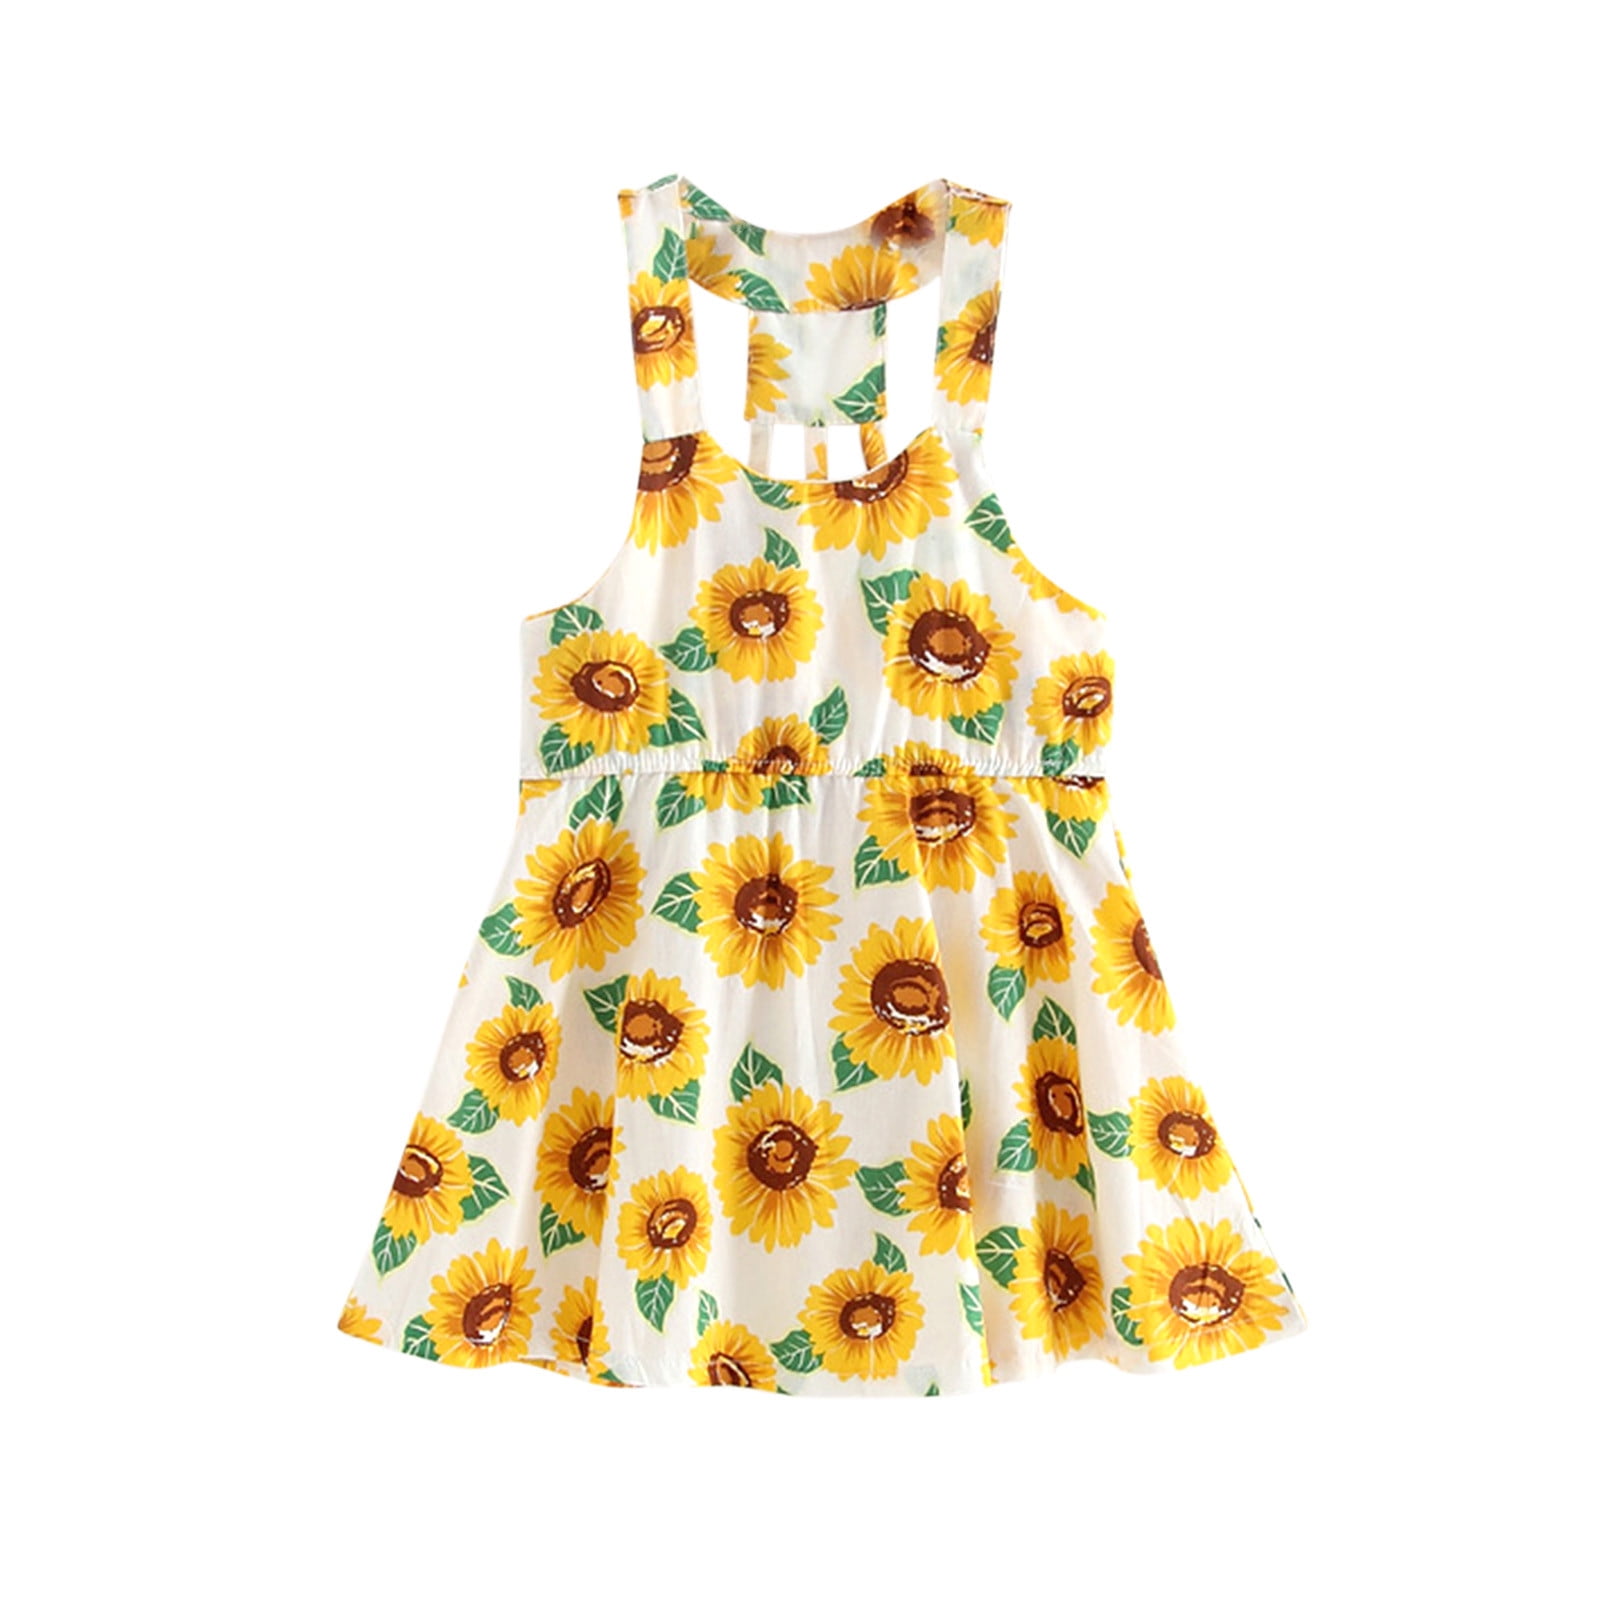 Girls Pretty Yellow Spring Print Summer Dress Floral Chick 1-1.5 1.5-2 2/3 Years 